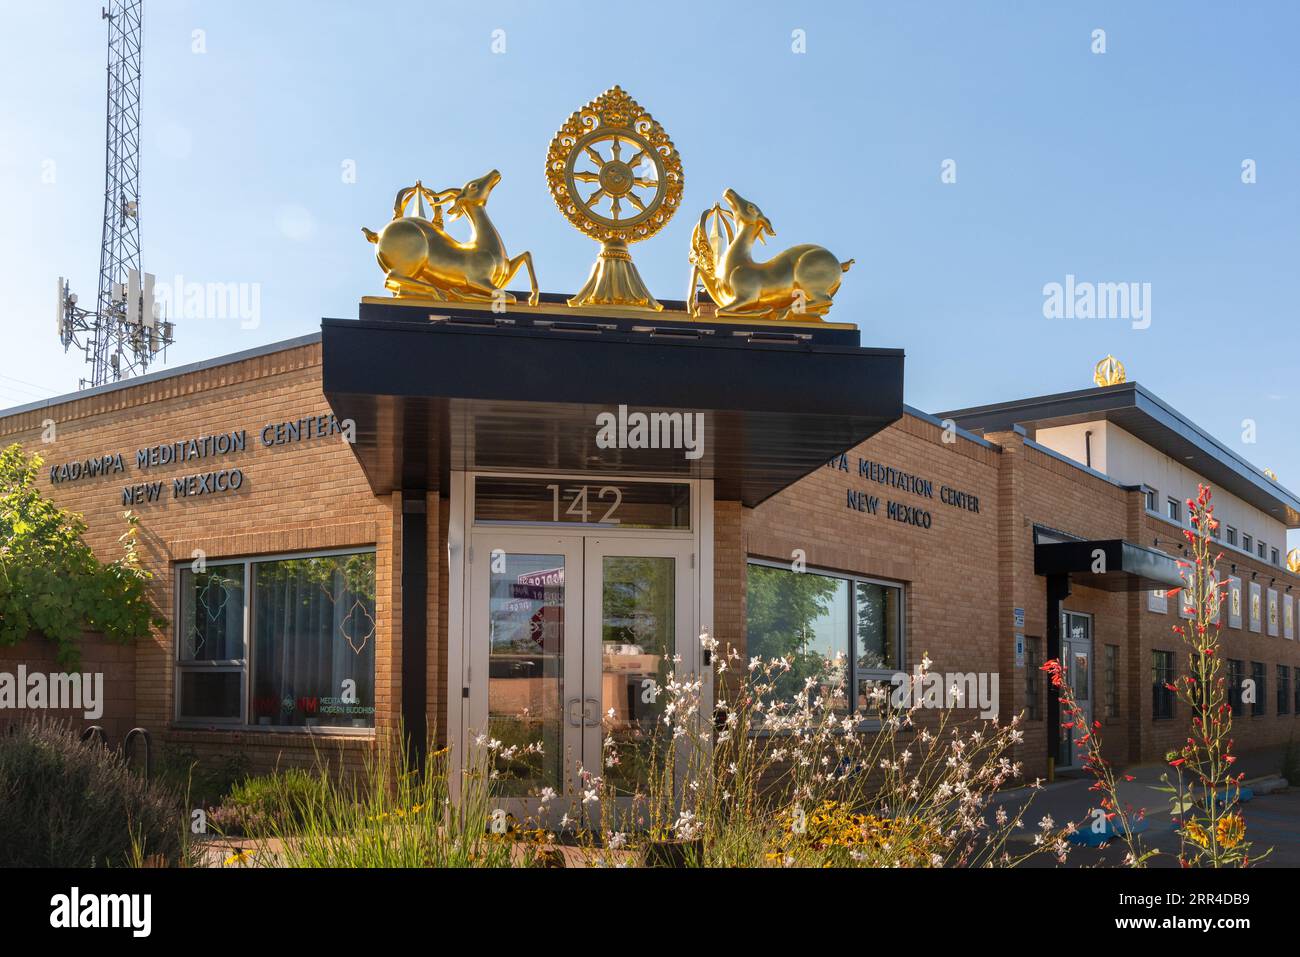 Exterior of Kadampa Meditation Center New Mexico, a one story brick building with golden buddhist symbols, dharmacharka and deer, Albuquerque, USA. Stock Photo